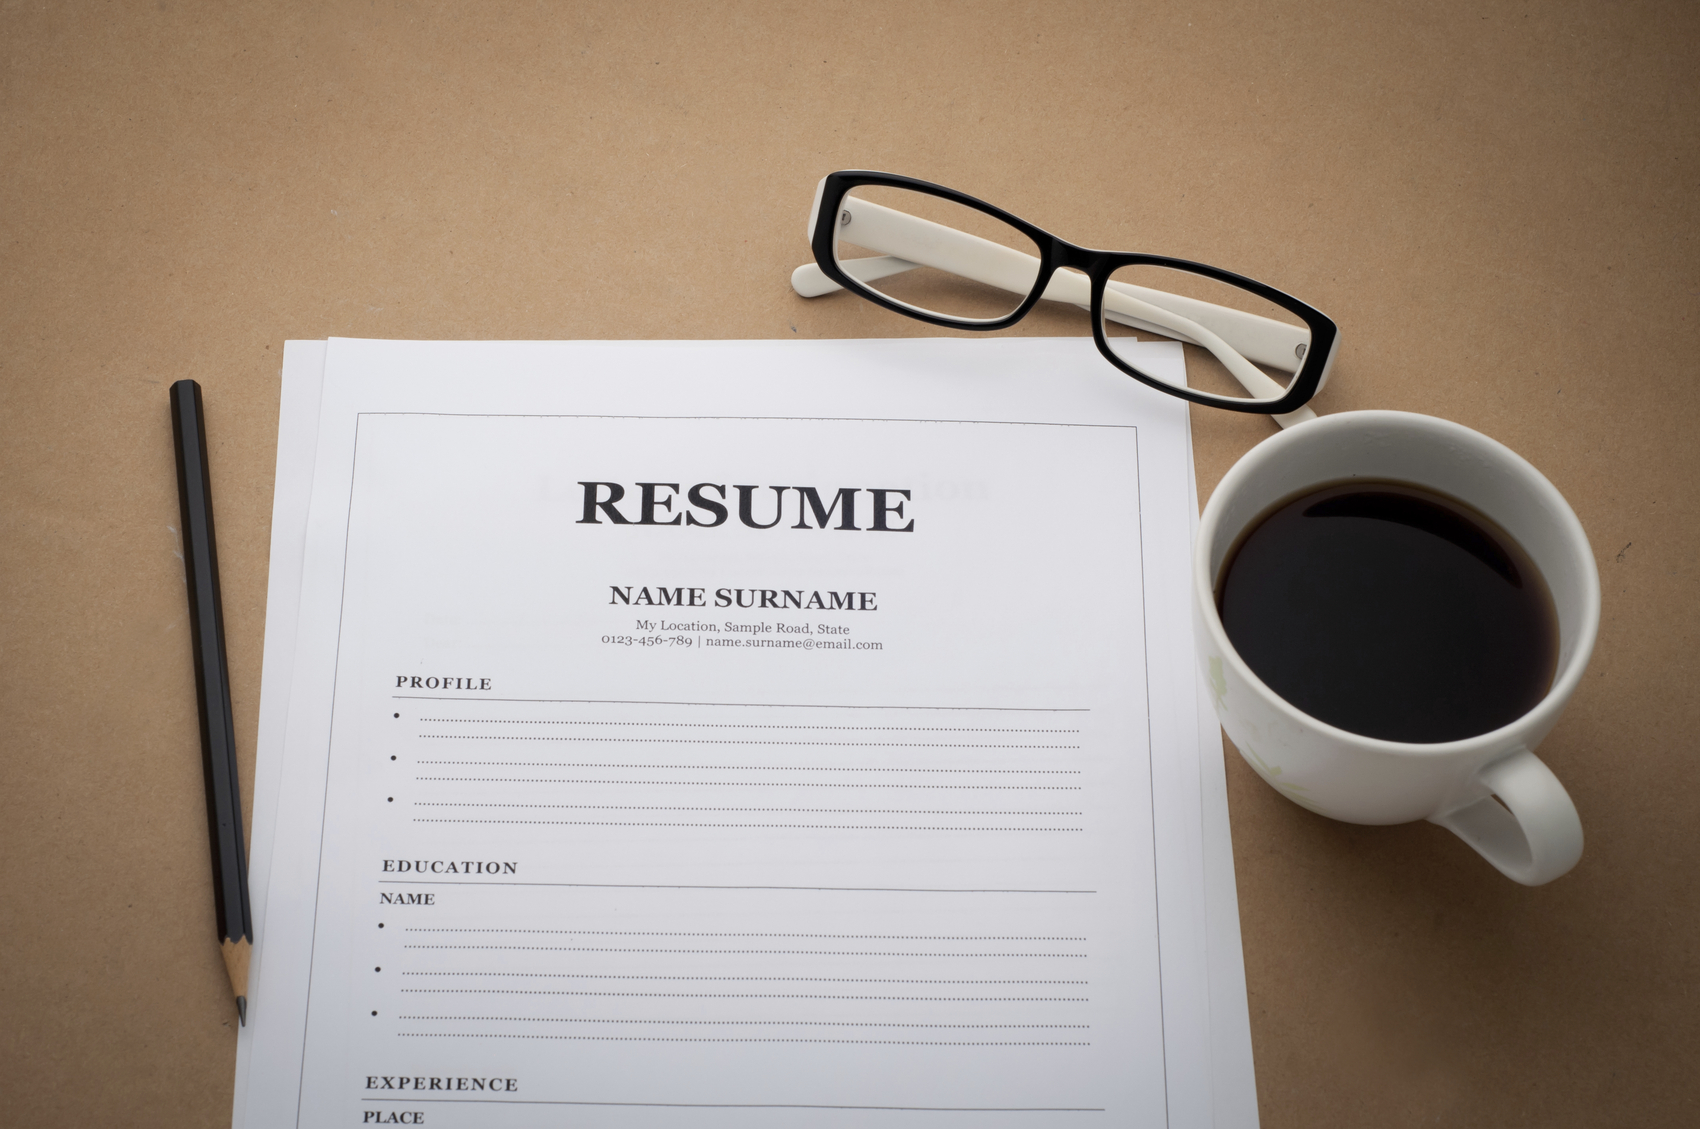 tips in writing a good resume